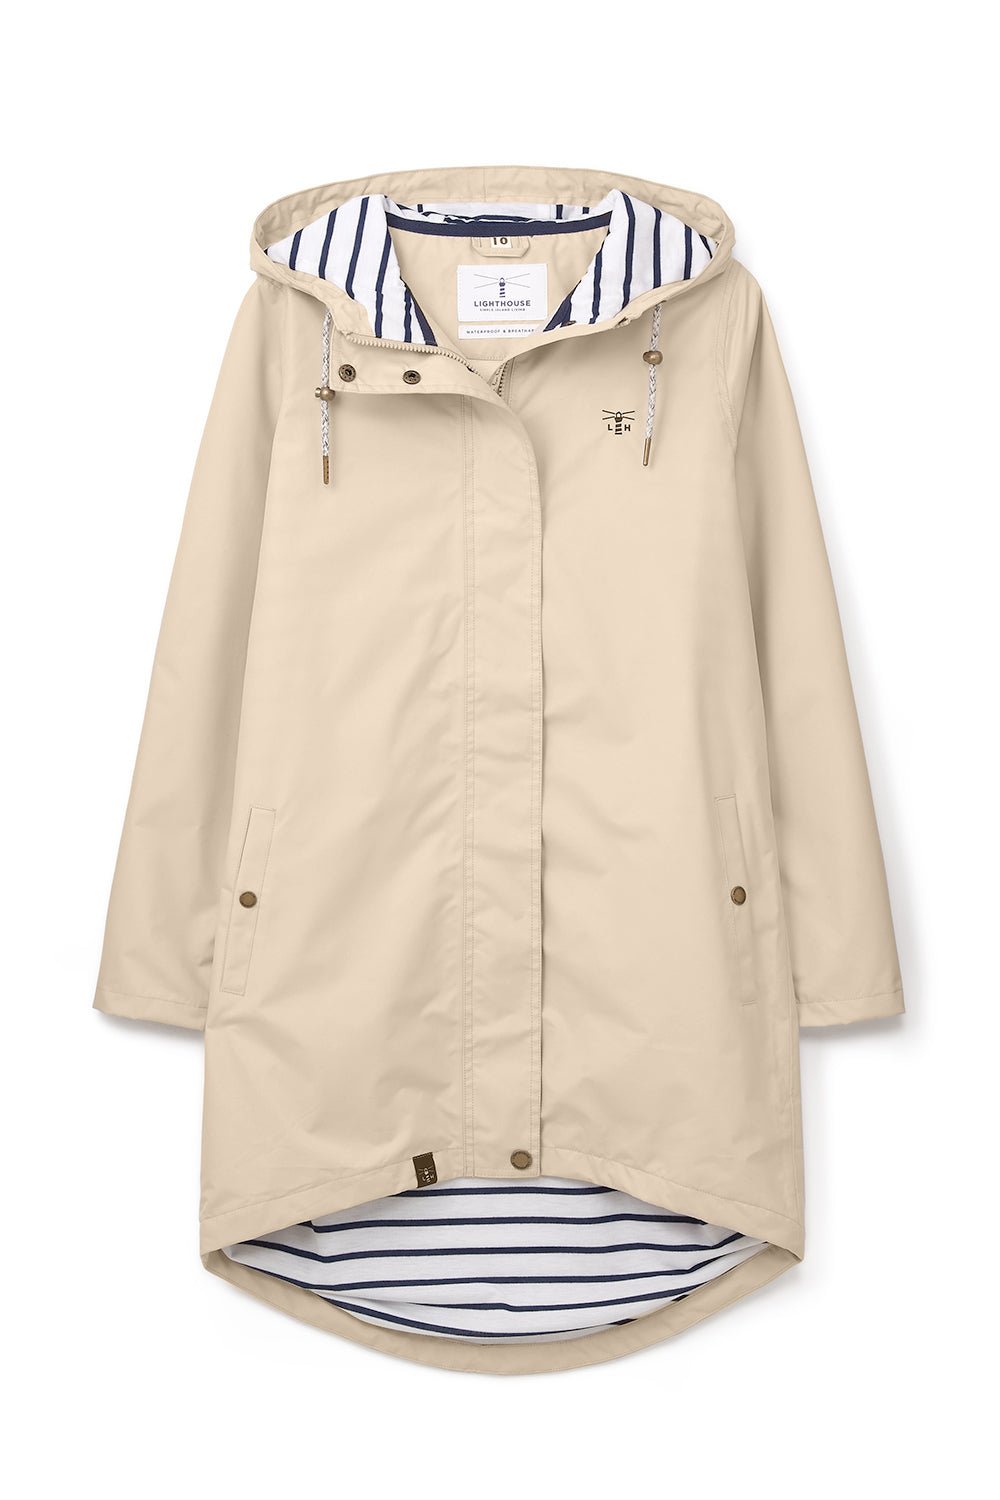 Long Beachcomber Jacket - Biscuit-Lighthouse